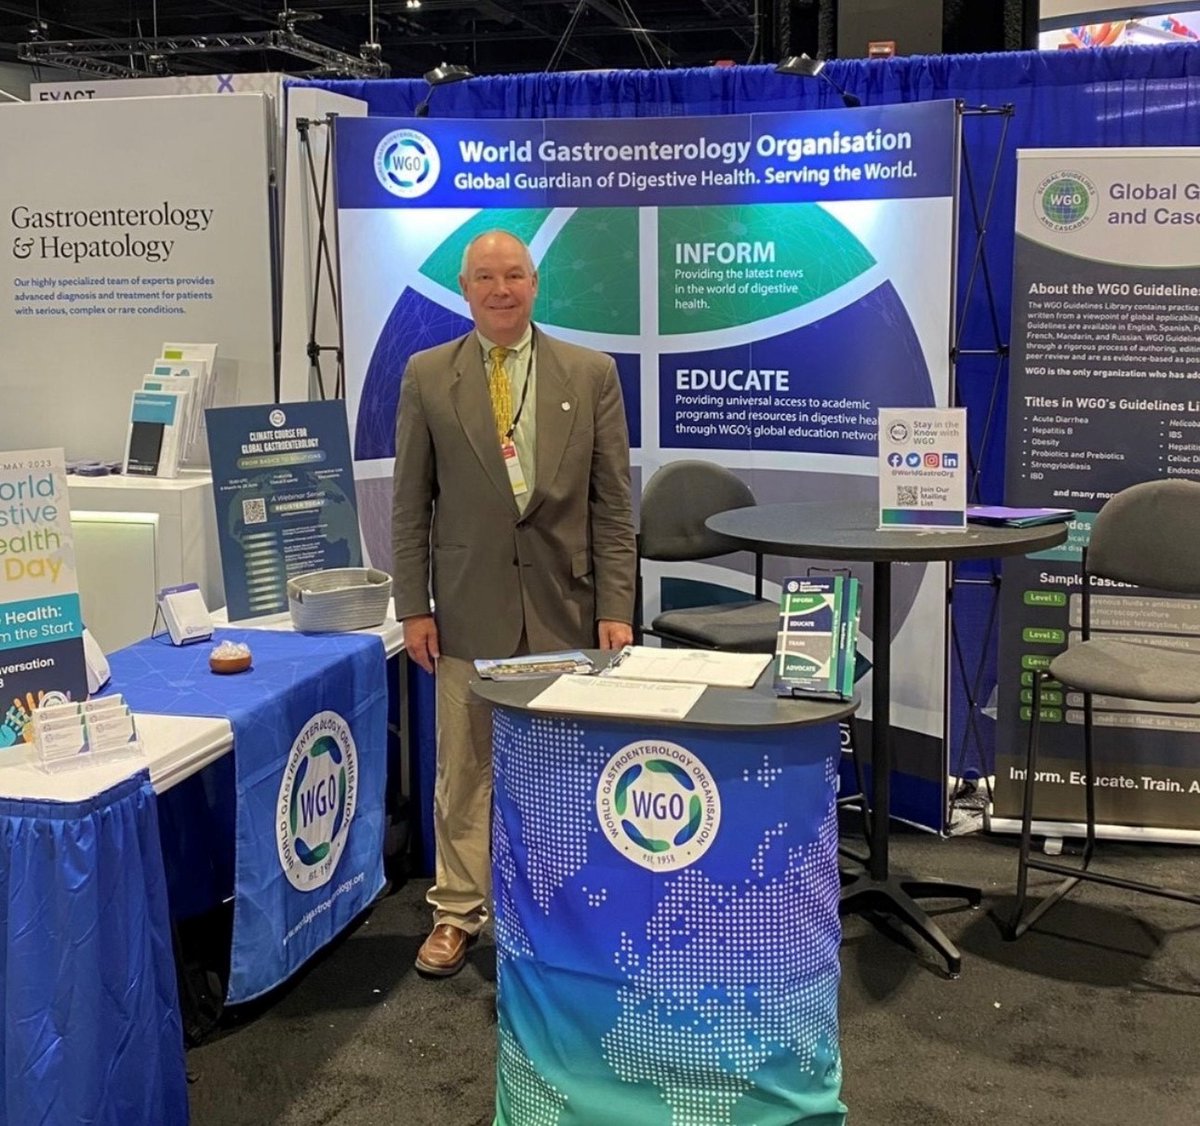 DDW here we come! Digestive Disease Week is almost here and we hope to see you all there. Make sure you swing by and say hello to WGO at booth #1828! #DDW2024 #WashingtonDC @DDWMeeting